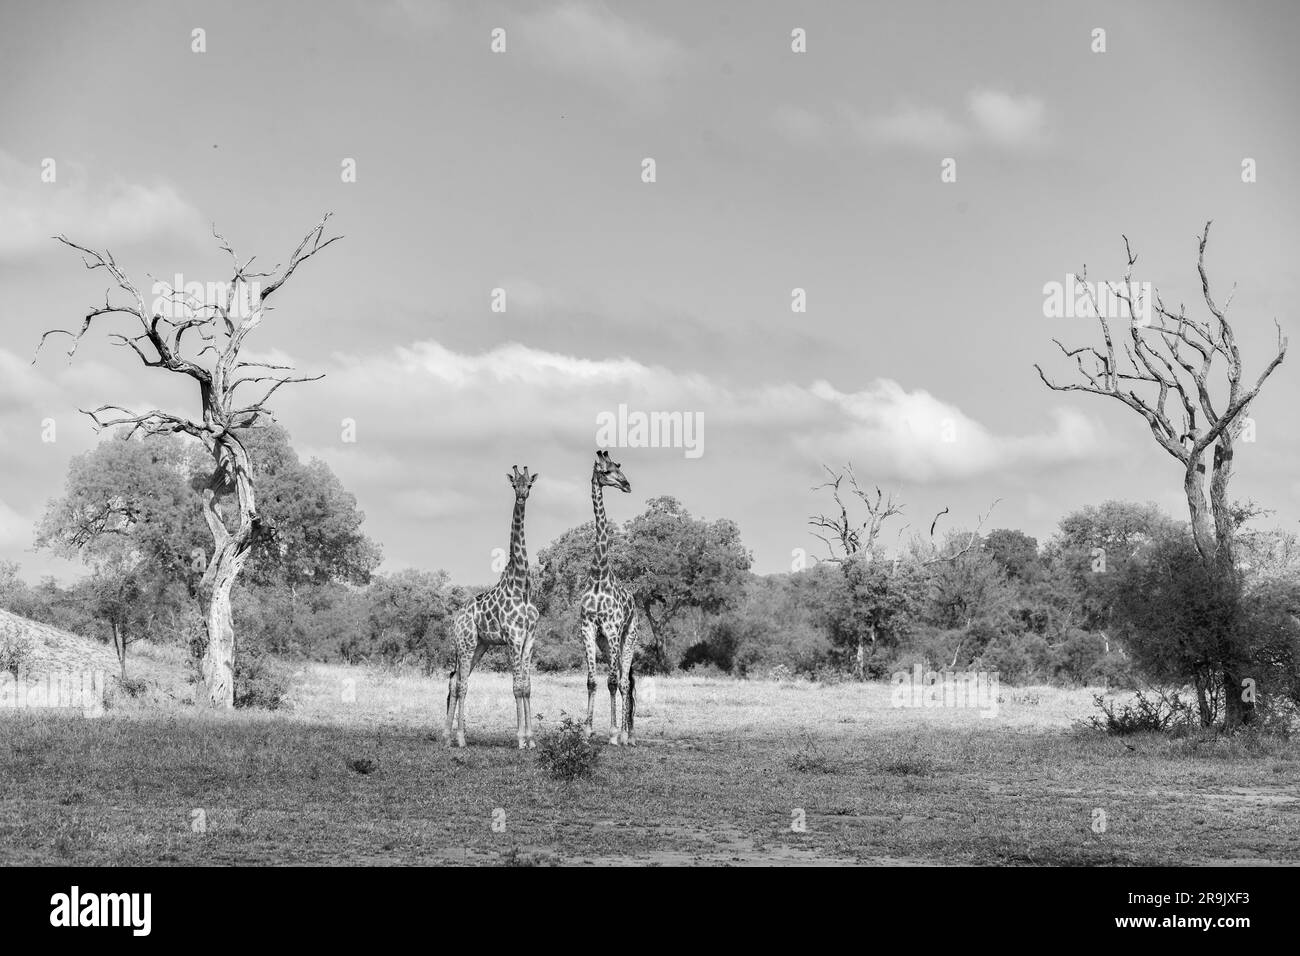 Two giraffe, Giraffa, stand together in a clearing, amongst leadwood trees, in black and white. Stock Photo